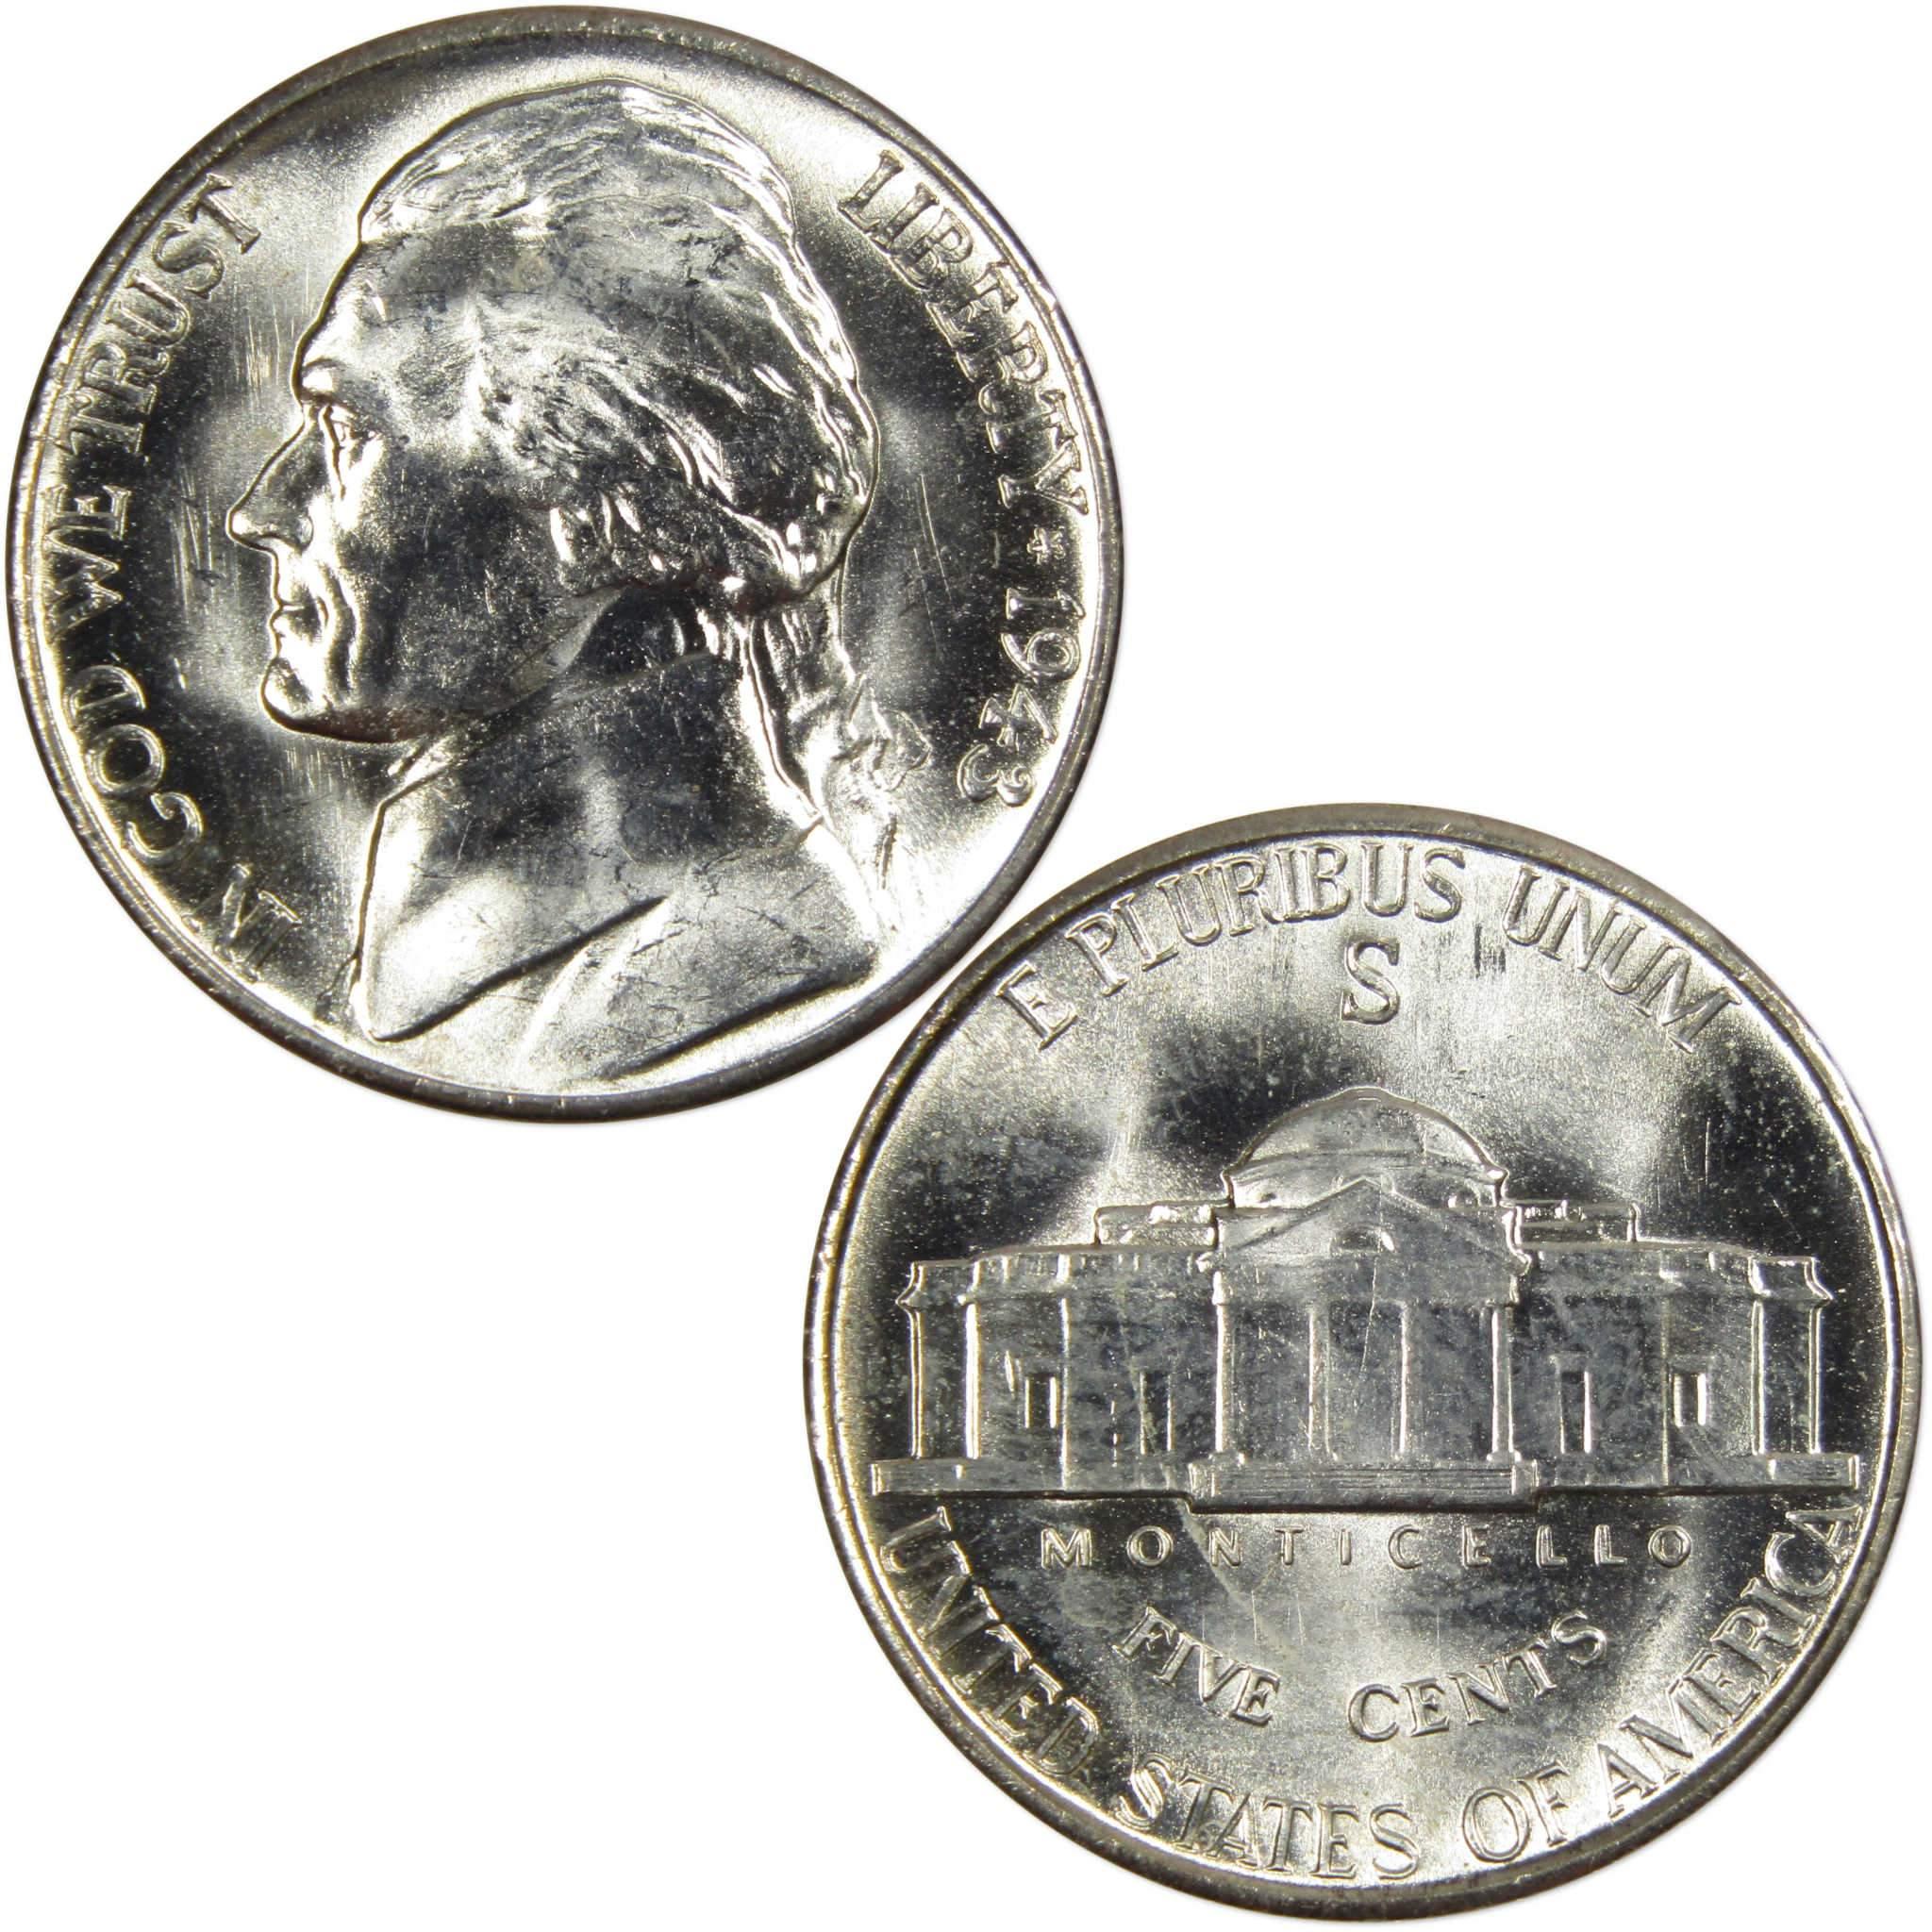 Jefferson Wartime Nickel 3 Coin PDS All-Mint Set BU Uncirculated 35% Silver 5c